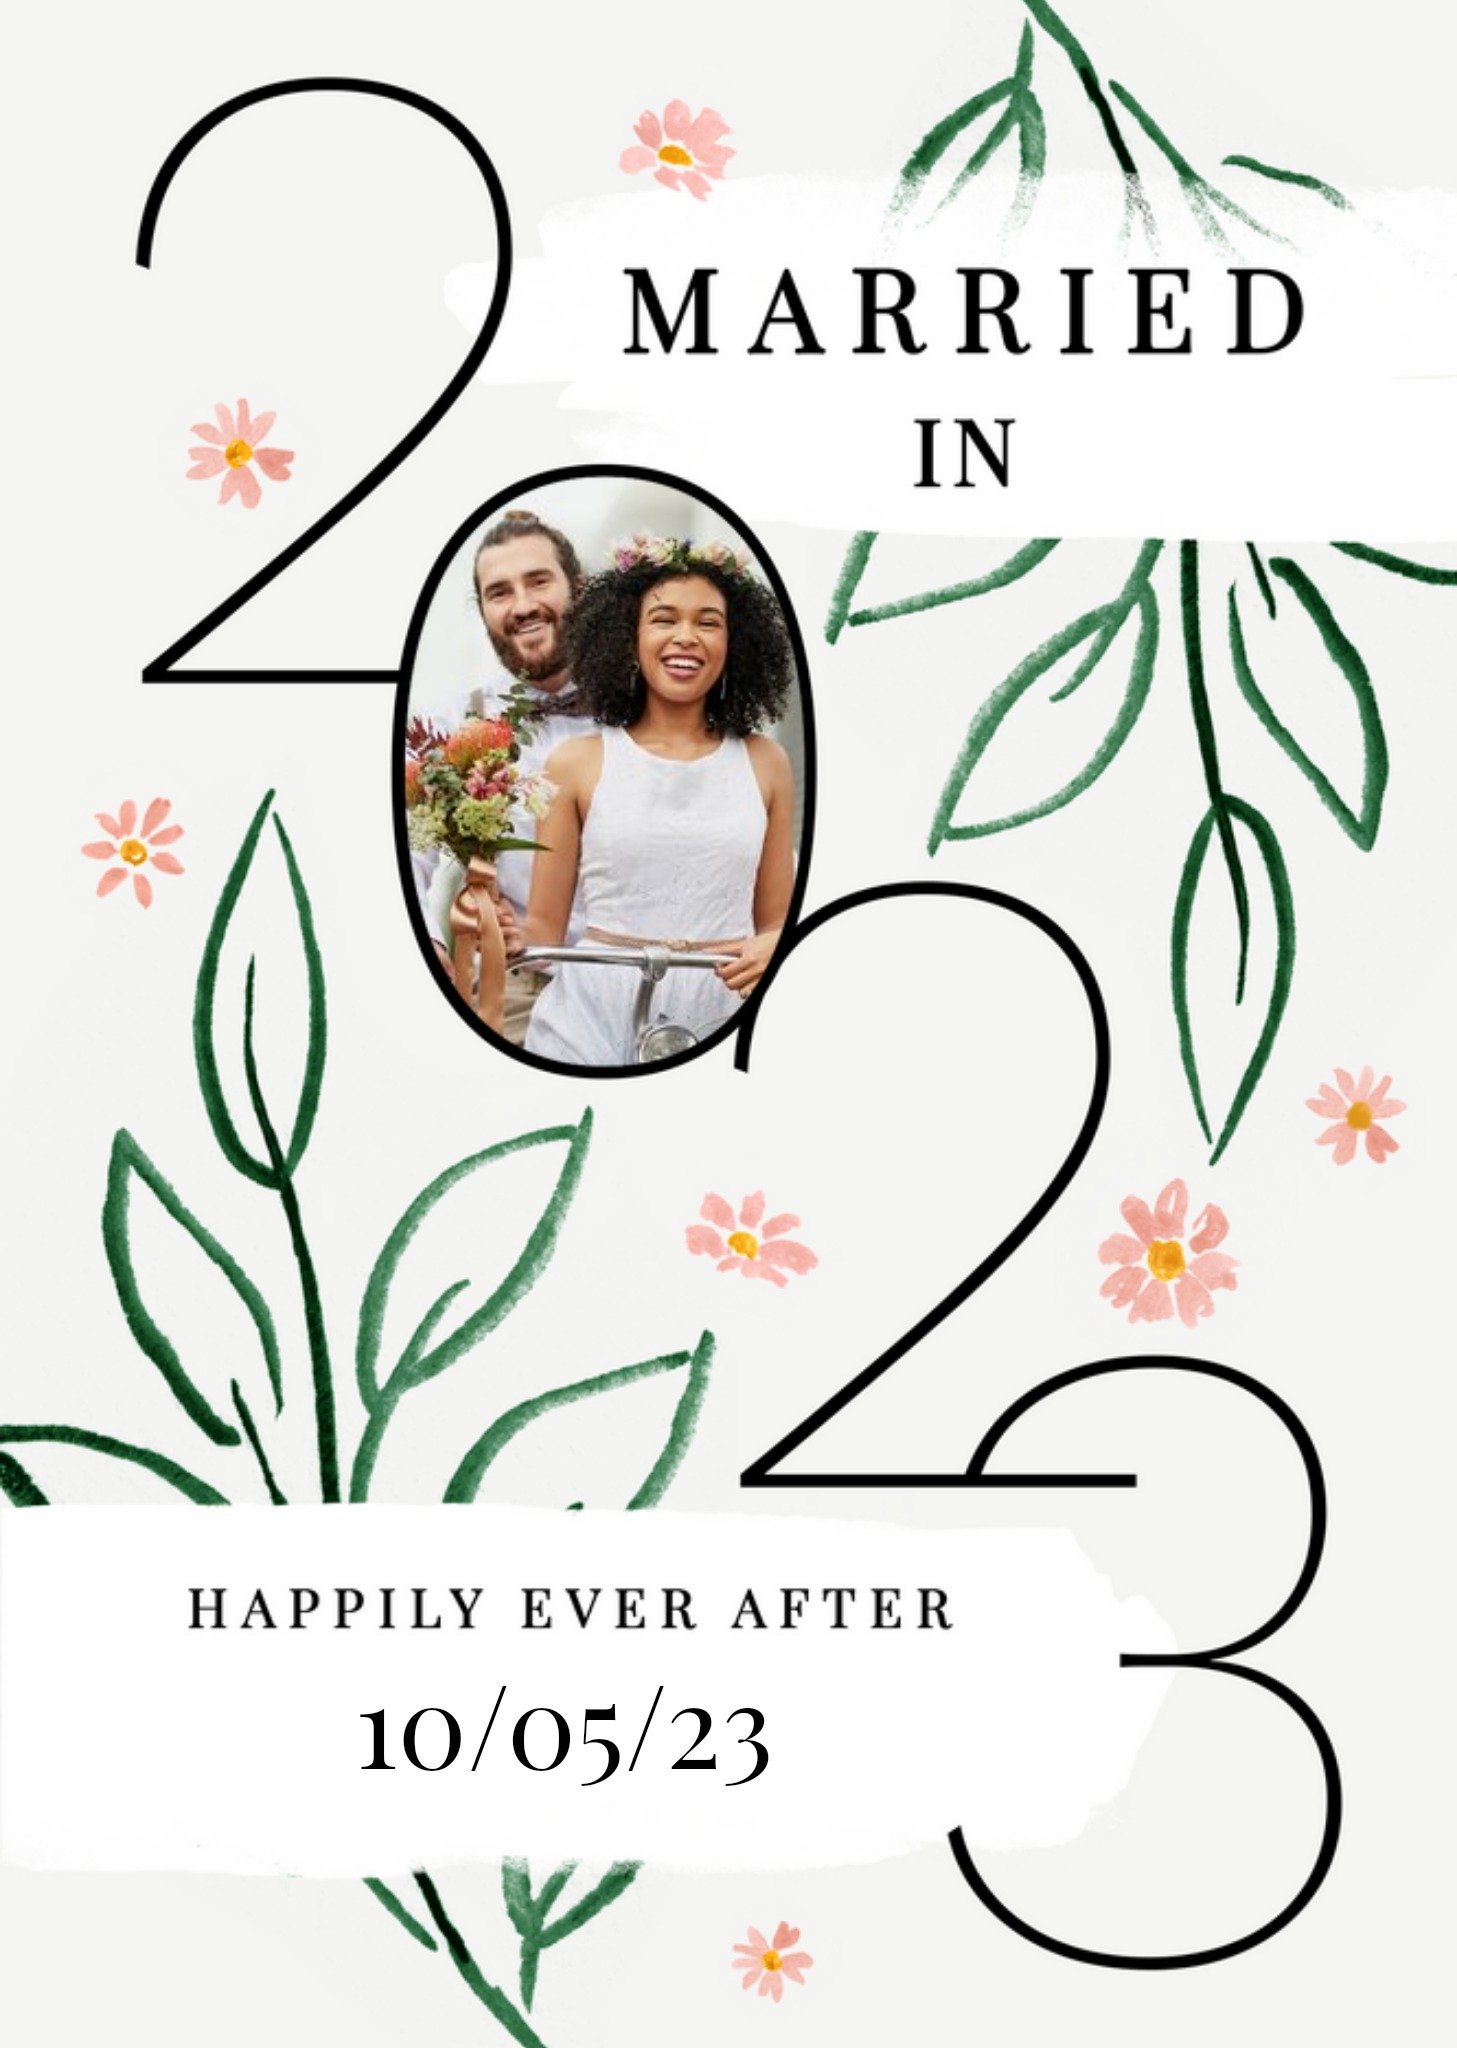 Moonpig Married In 2023 Photo Upload Wedding Card, Large